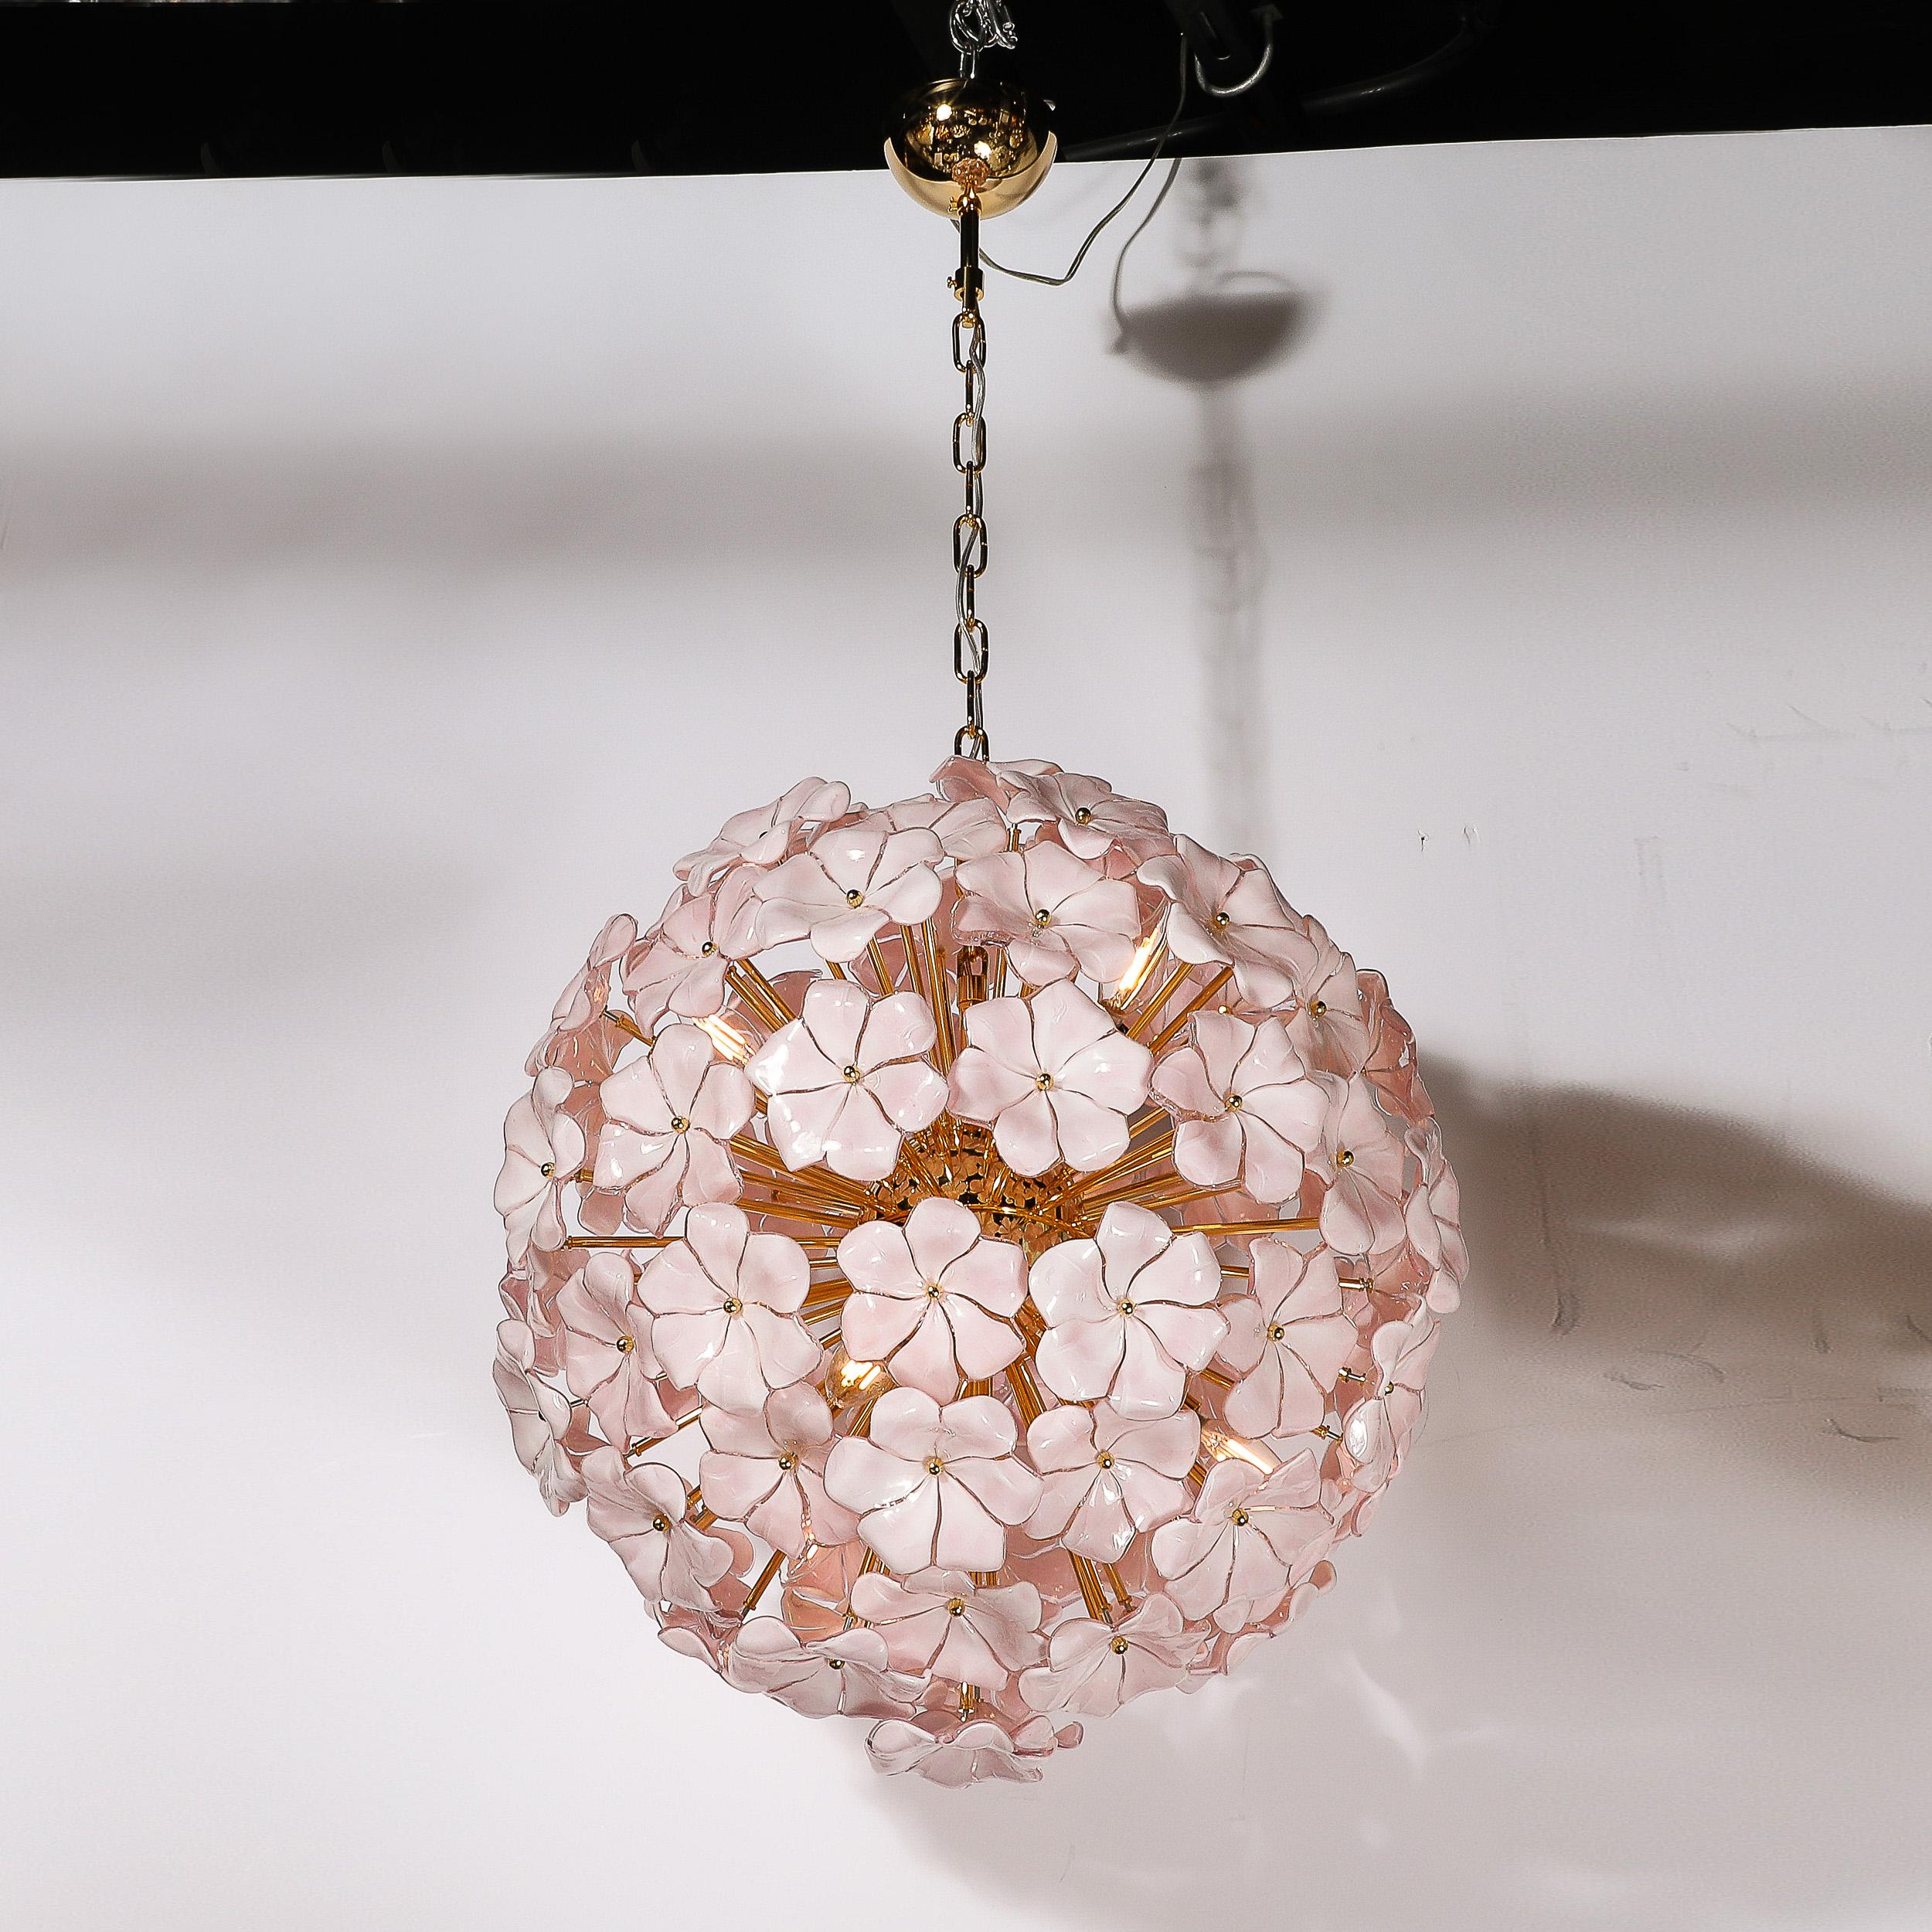 Contemporary Modernist Hand-Blown Murano Glass Sakura Pink Floral Chandelier & Brass Fittings For Sale